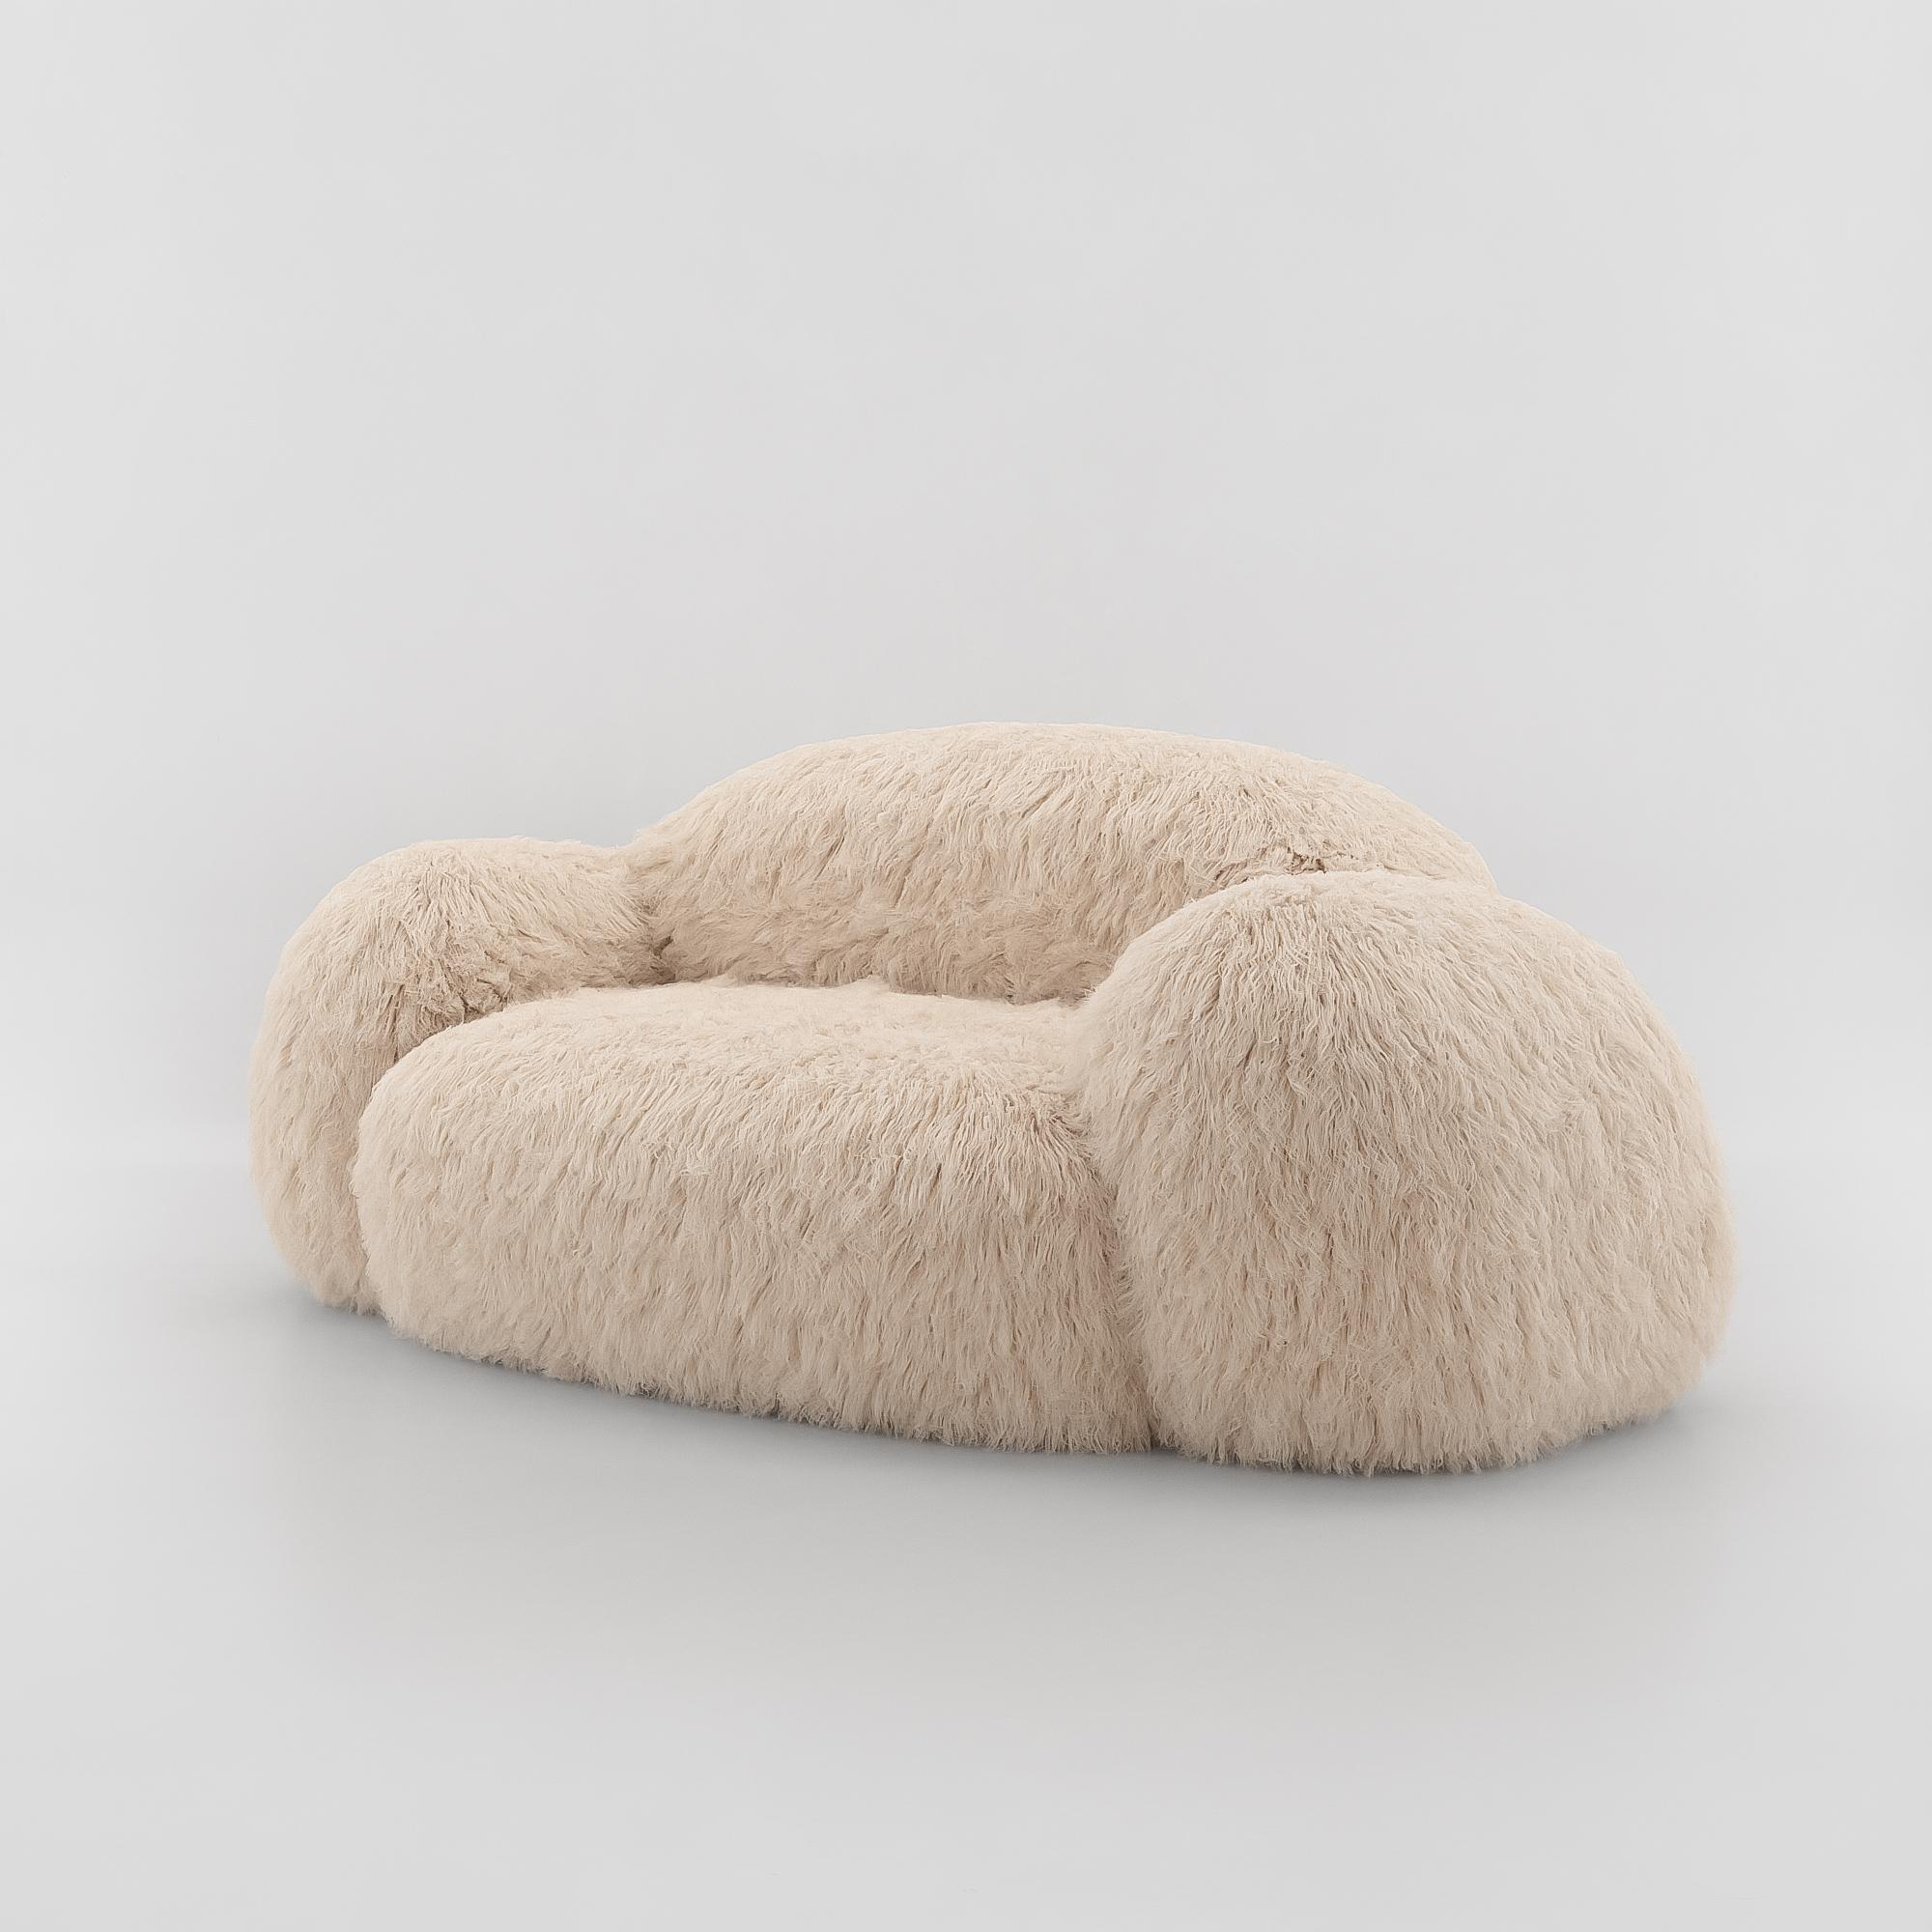 Yeti sofa by Vladimir Naumov
Dimensions: H 80 x W 210 x L 110 cm
Materials: Faux lama fur

Mongolia fur for the Yeti collection available in pink, beige, black and lilac.

TECHNICAL FEATURES
Pine wood structure, plywood and tablex.
Foam CMHR (high